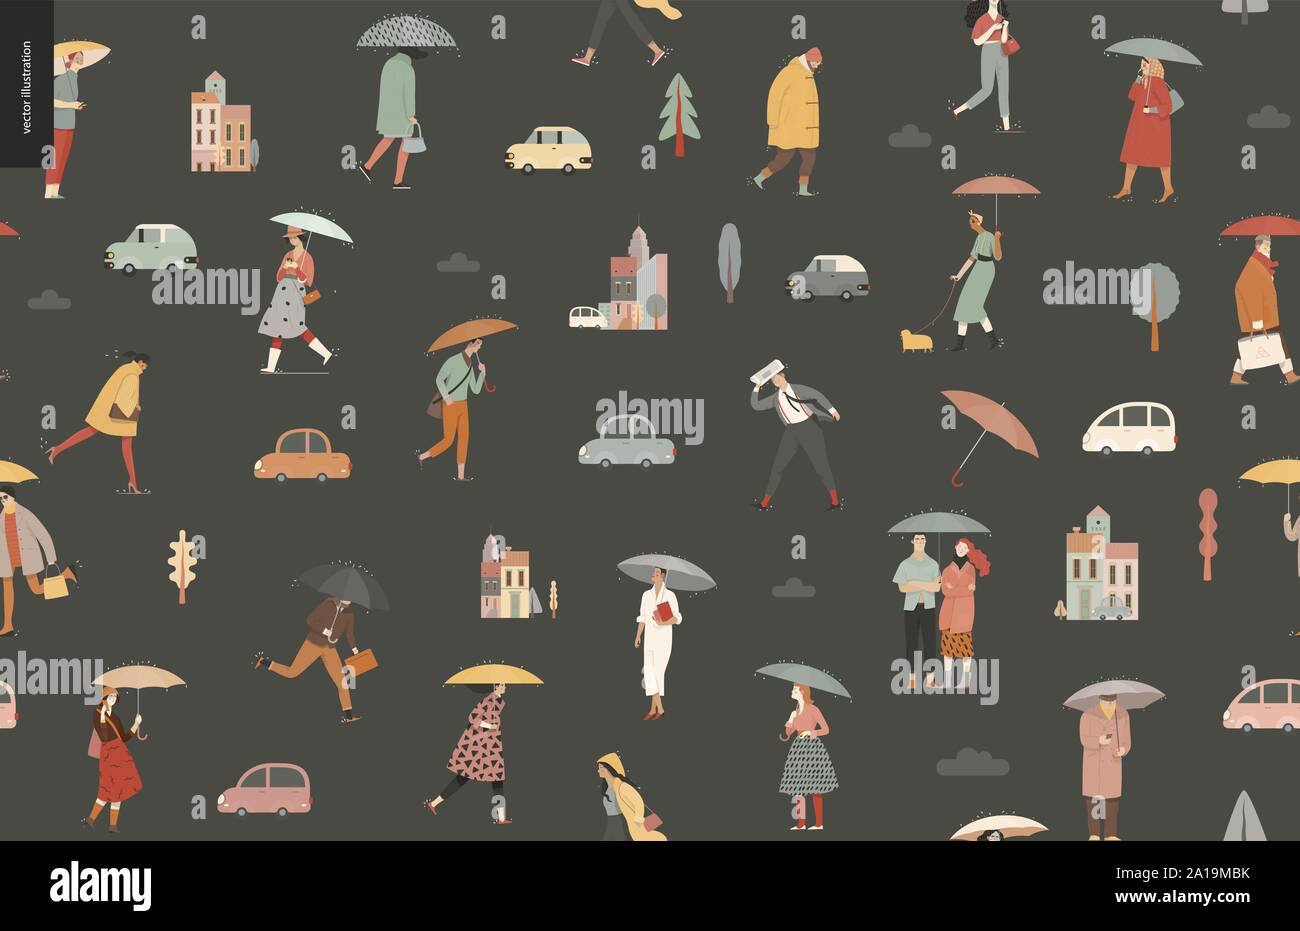 Rain -walking people seamless pattern -modern flat vector concept illustration of people with umbrella, walking or standing in the rain in the street, Stock Vector